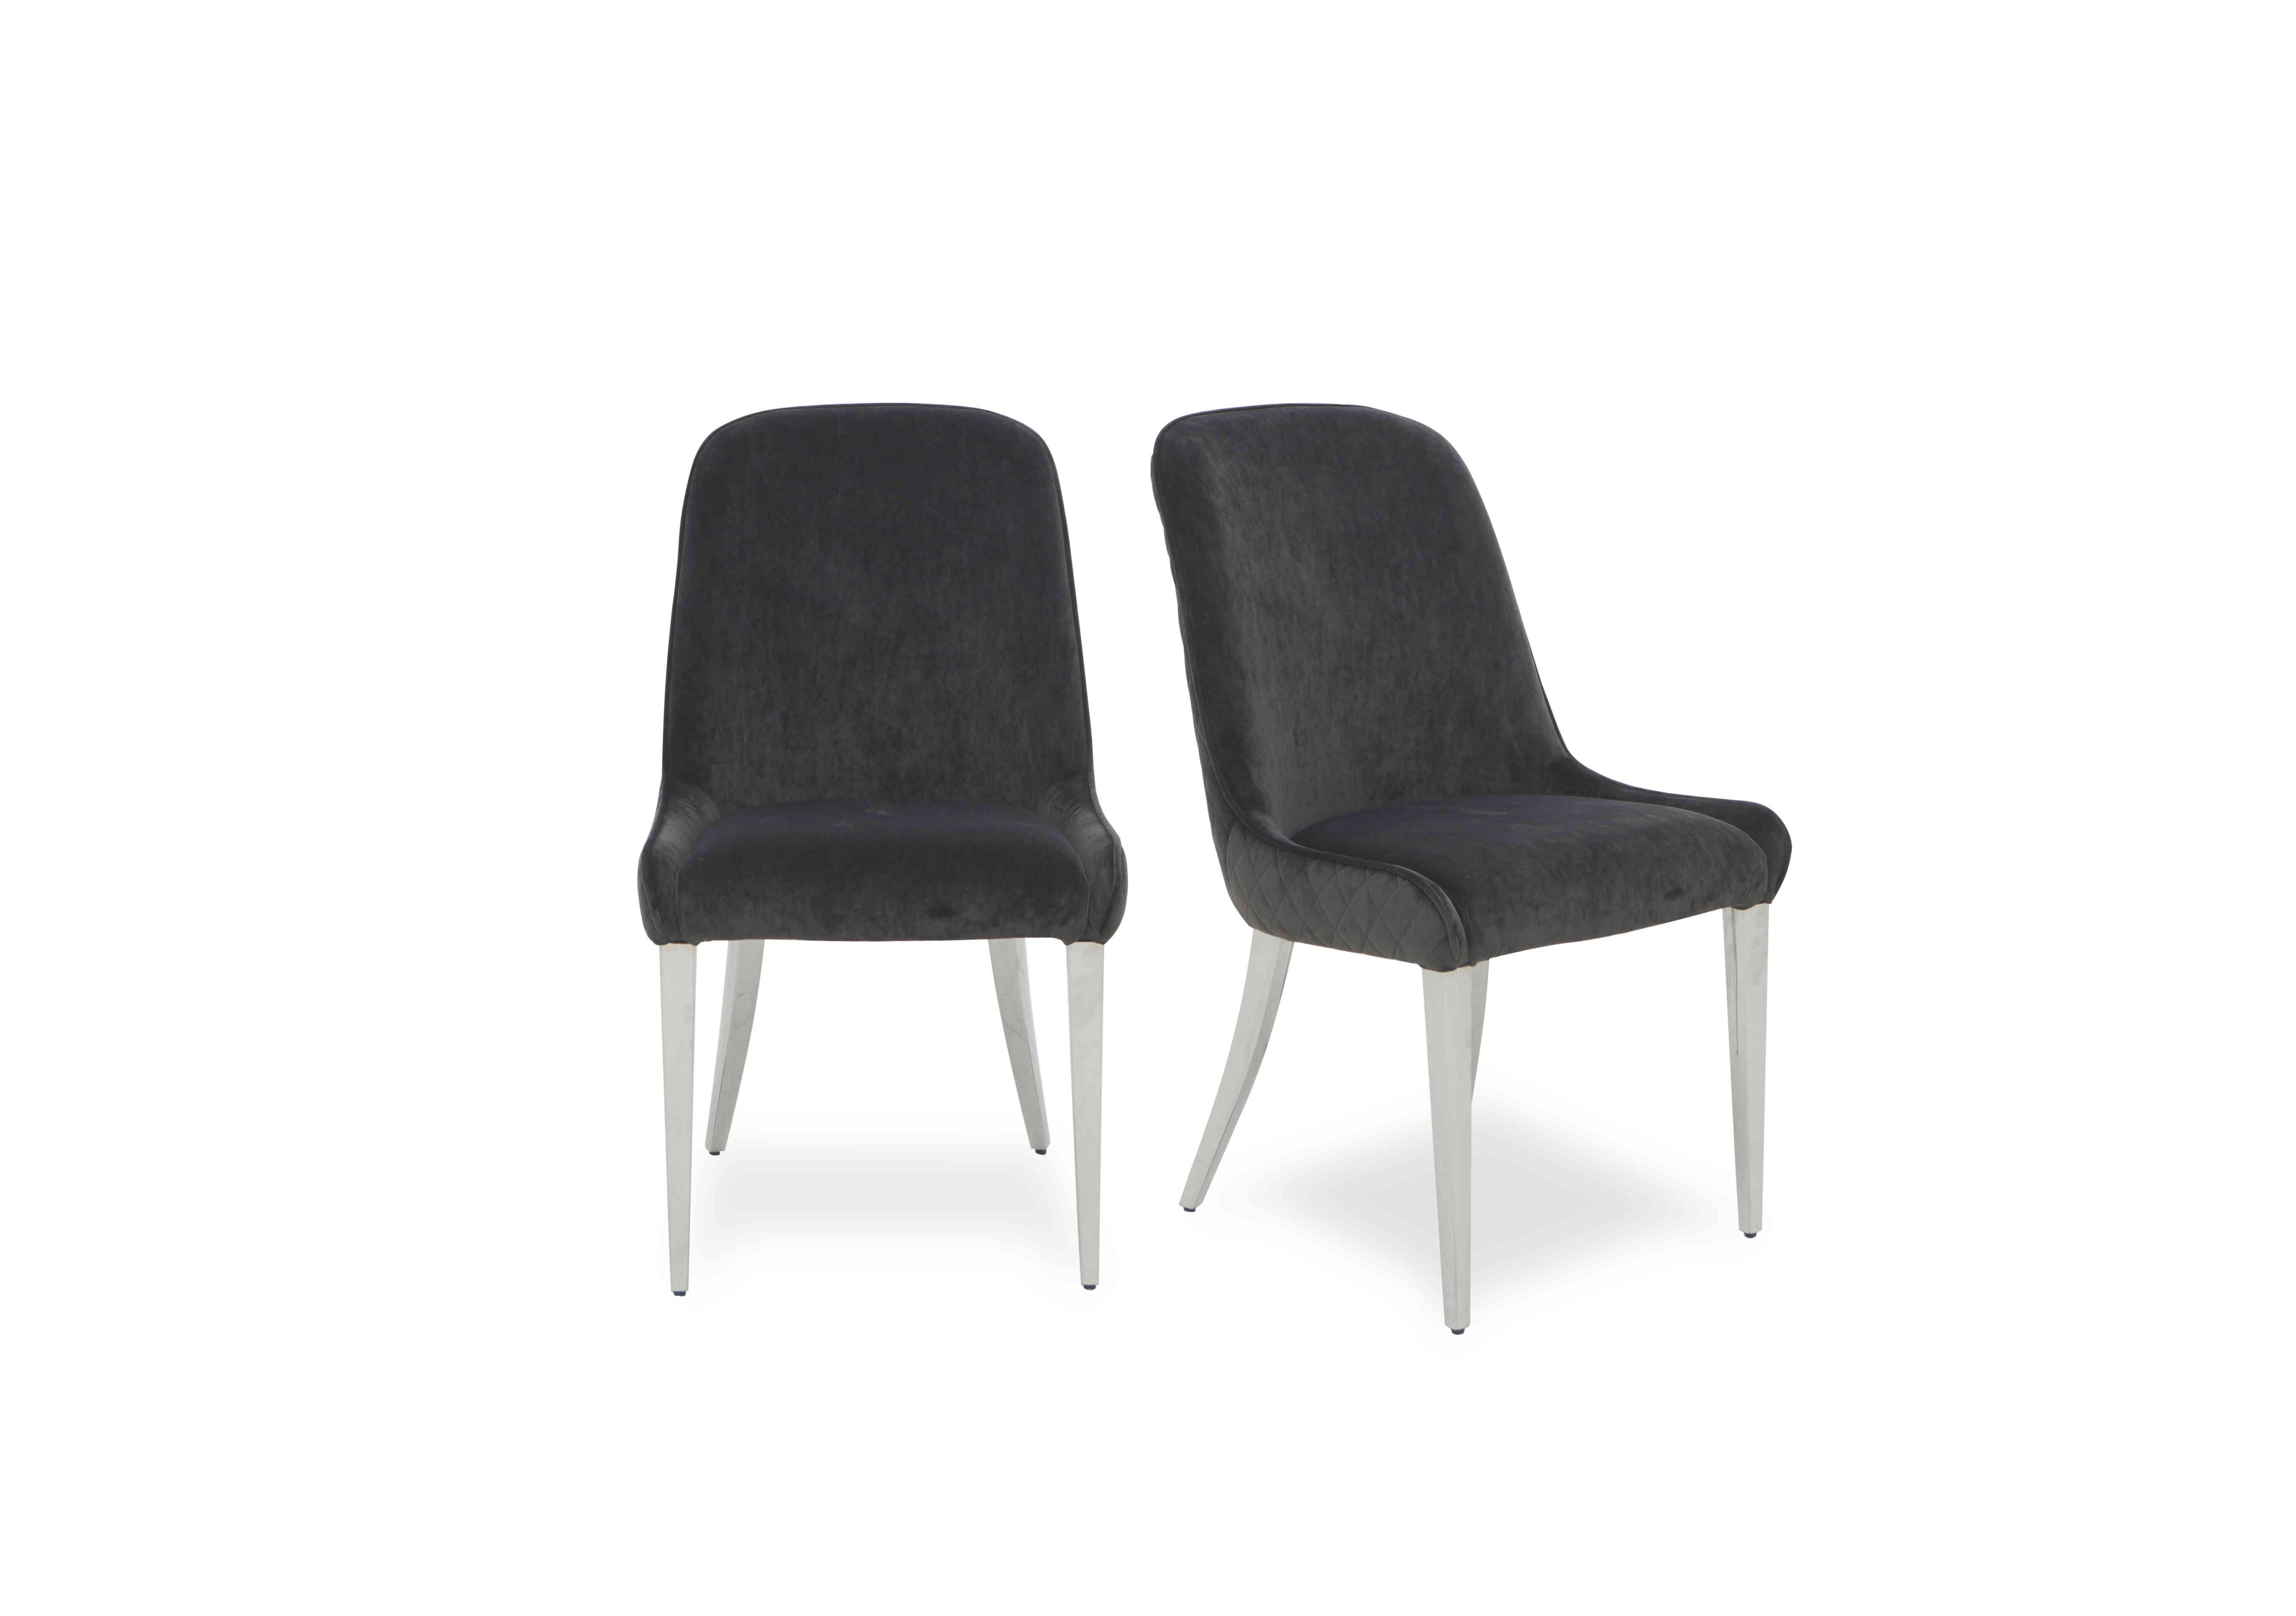 Gabana Pair of Velvet Dining Chairs in Charcoal on Furniture Village